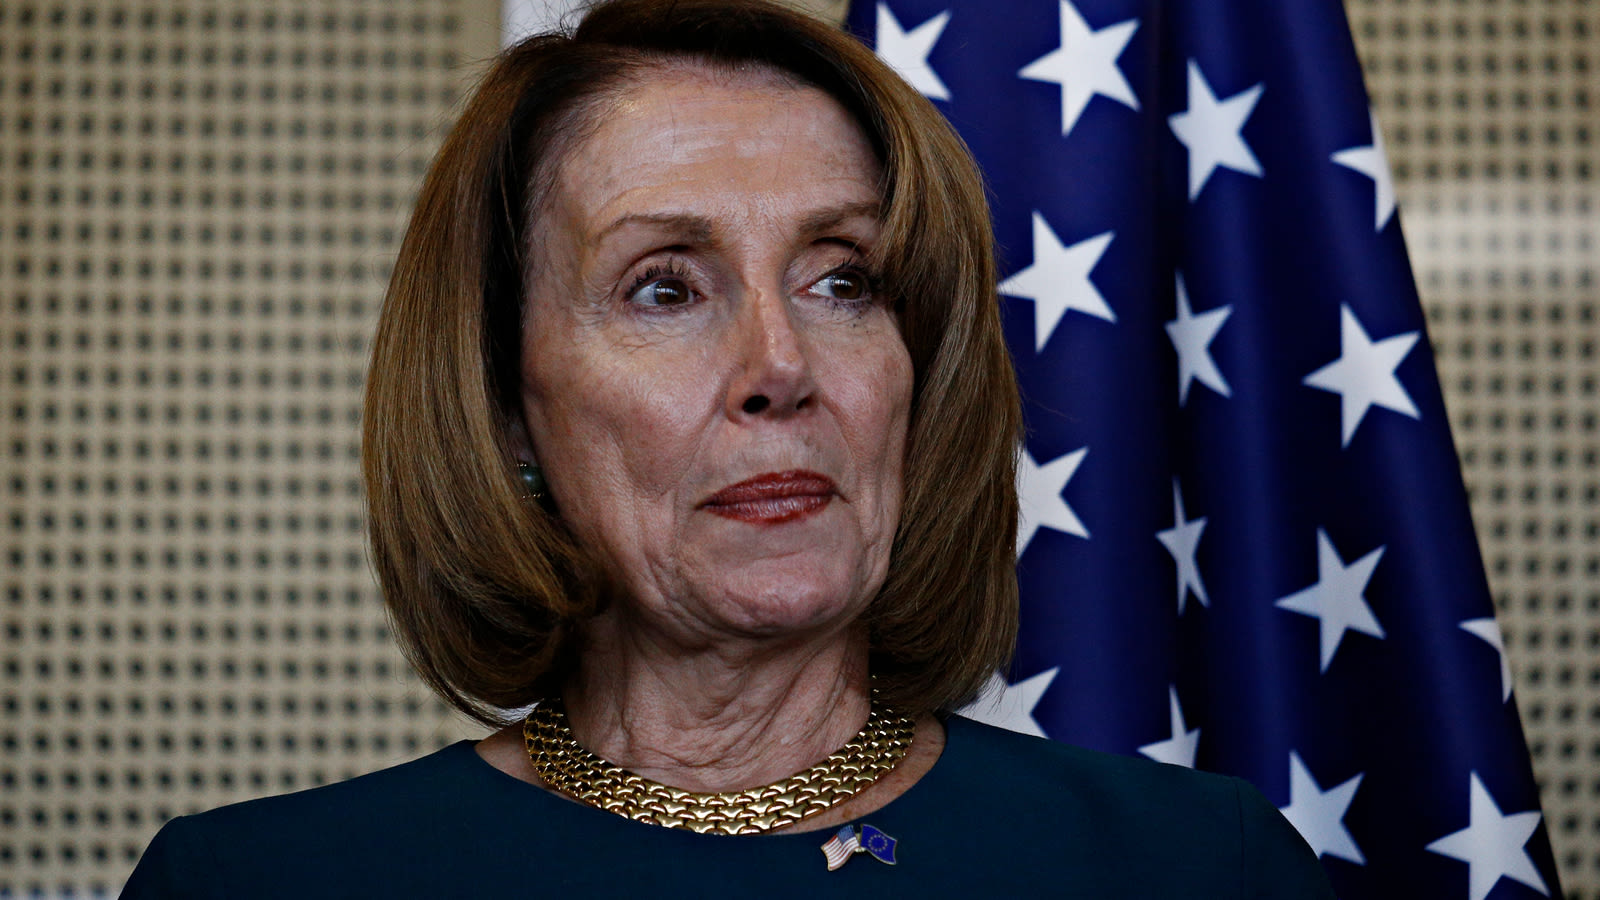 2 Stocks Nancy Pelosi Just Bought, and 1 She Sold. Should You Follow Pelosi’s Trades?